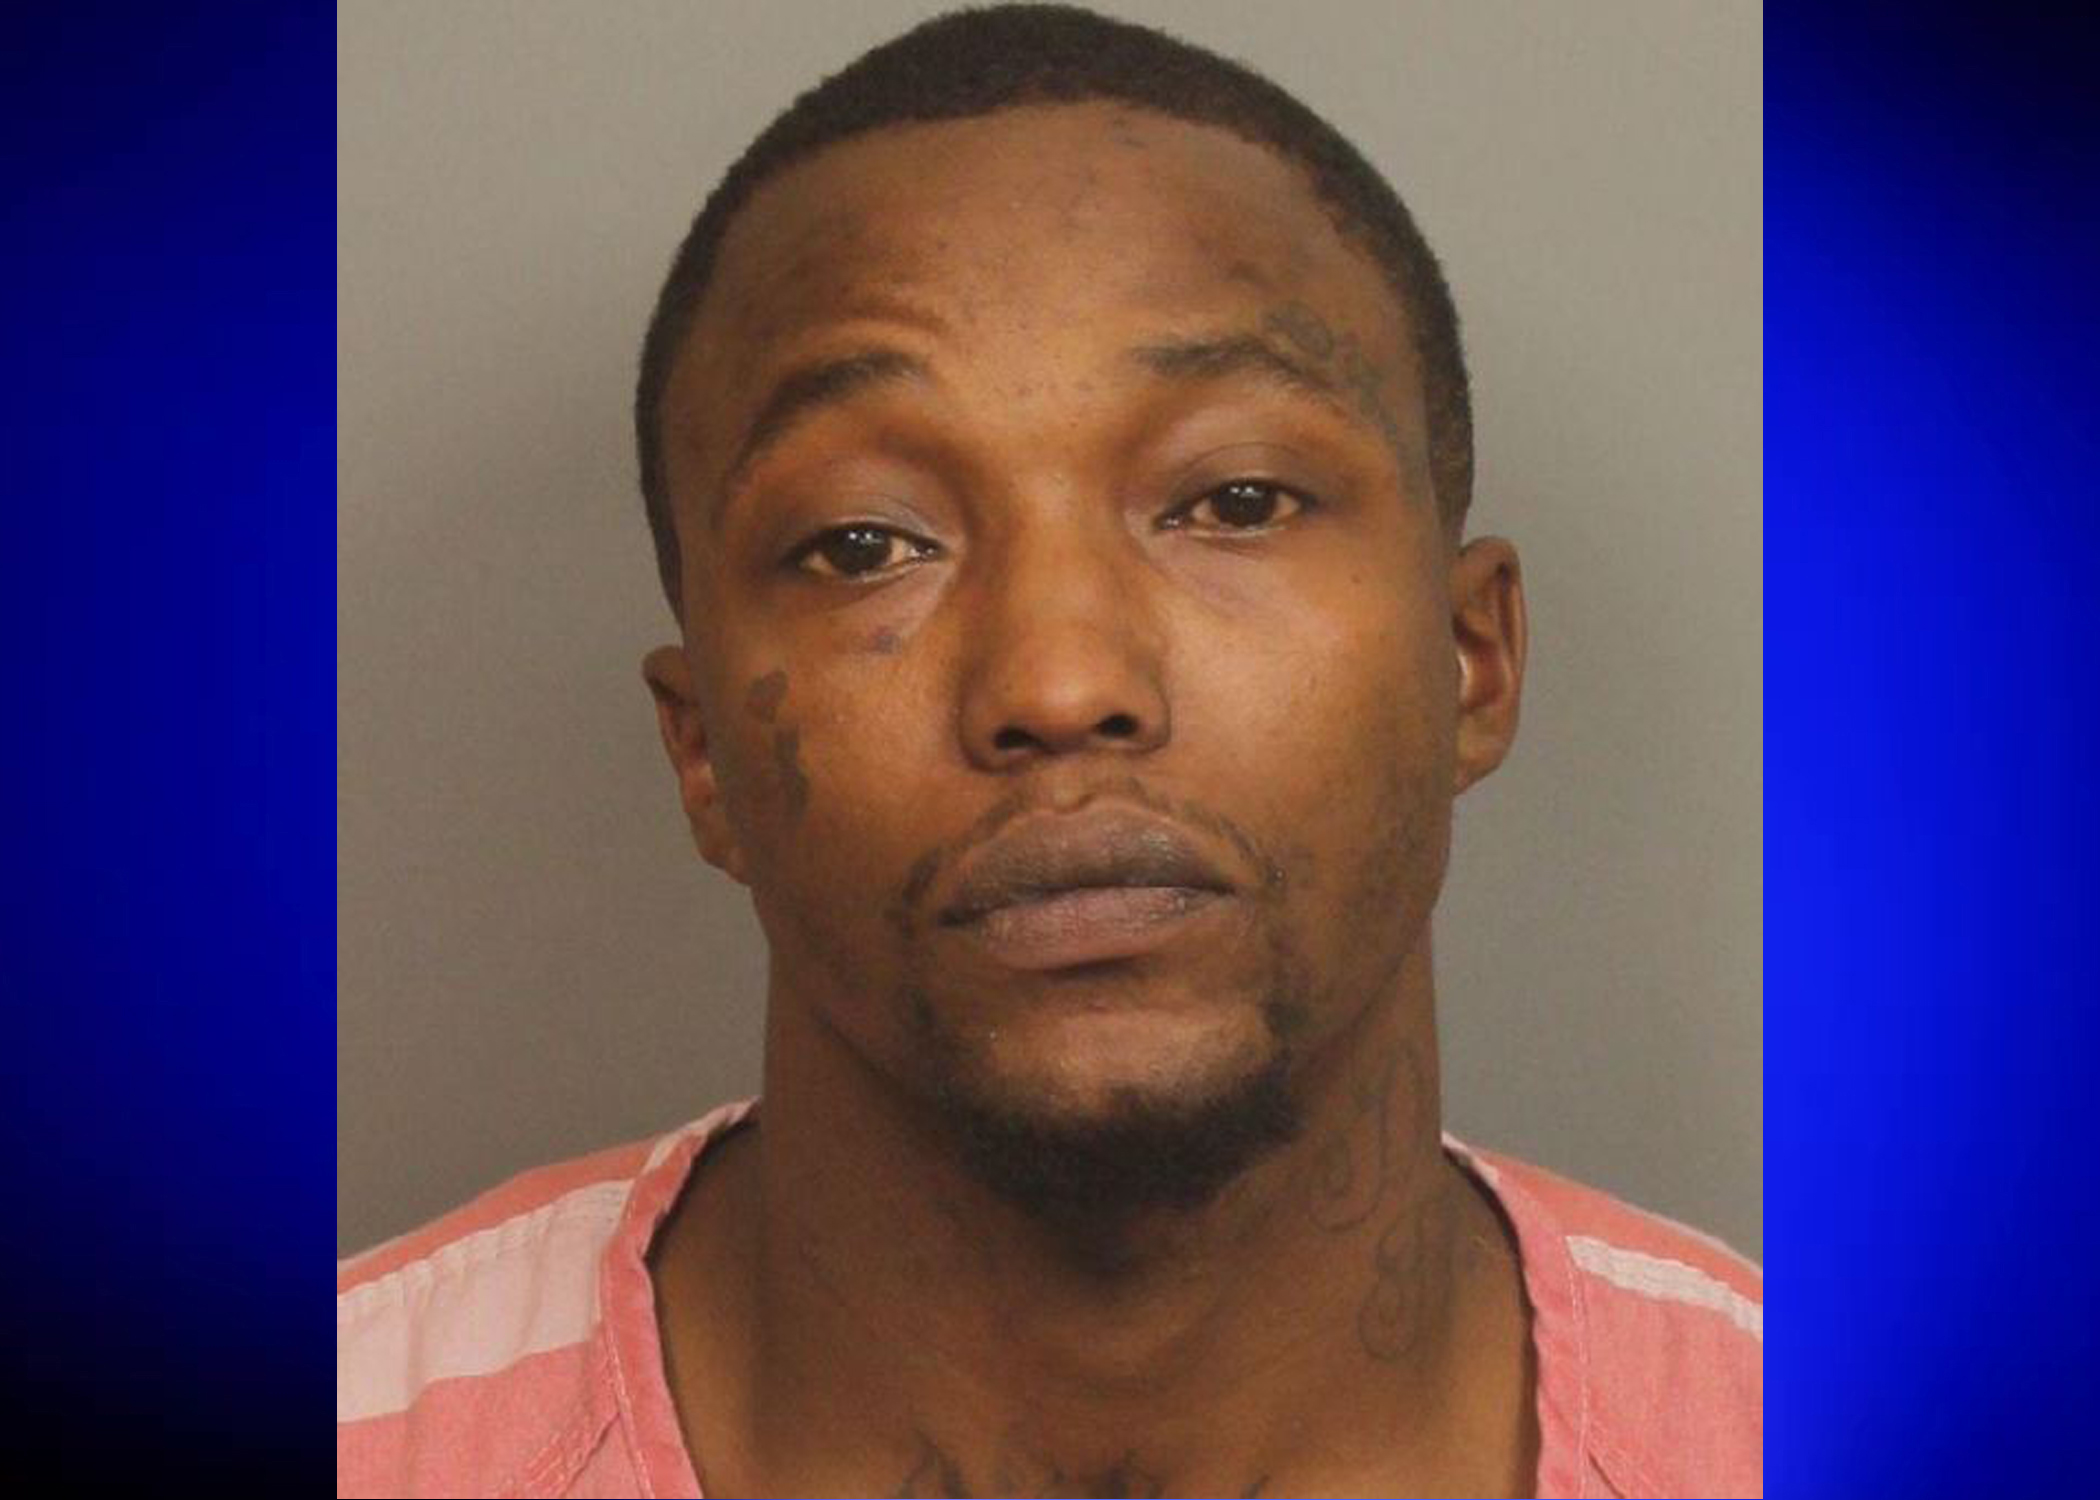 Second suspect arrested in connection to deadly home invasion